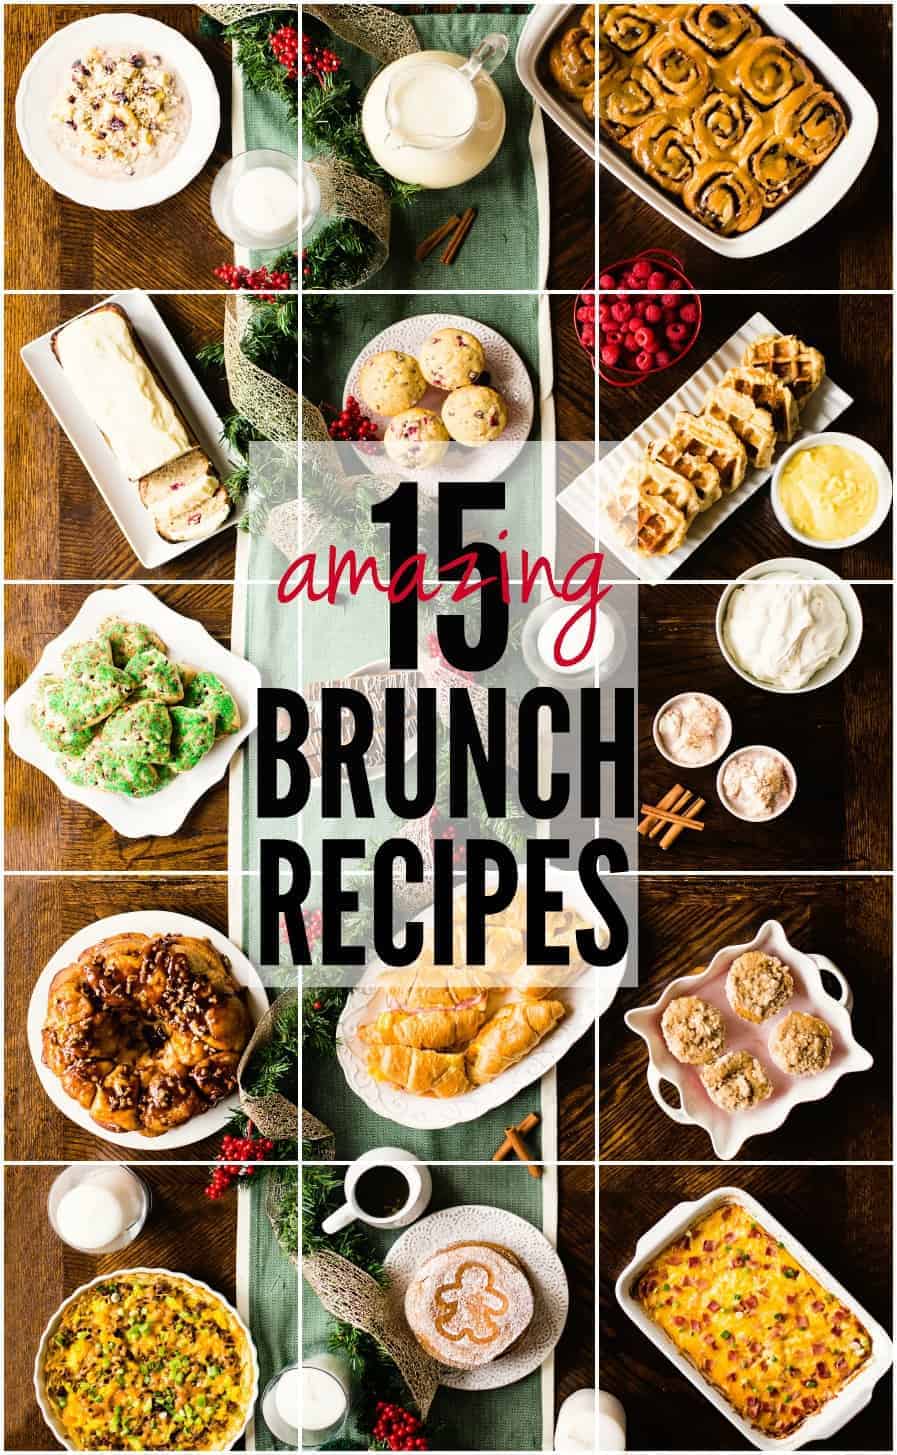 Christmas Brunch Recipe Round Up | The Recipe Critic